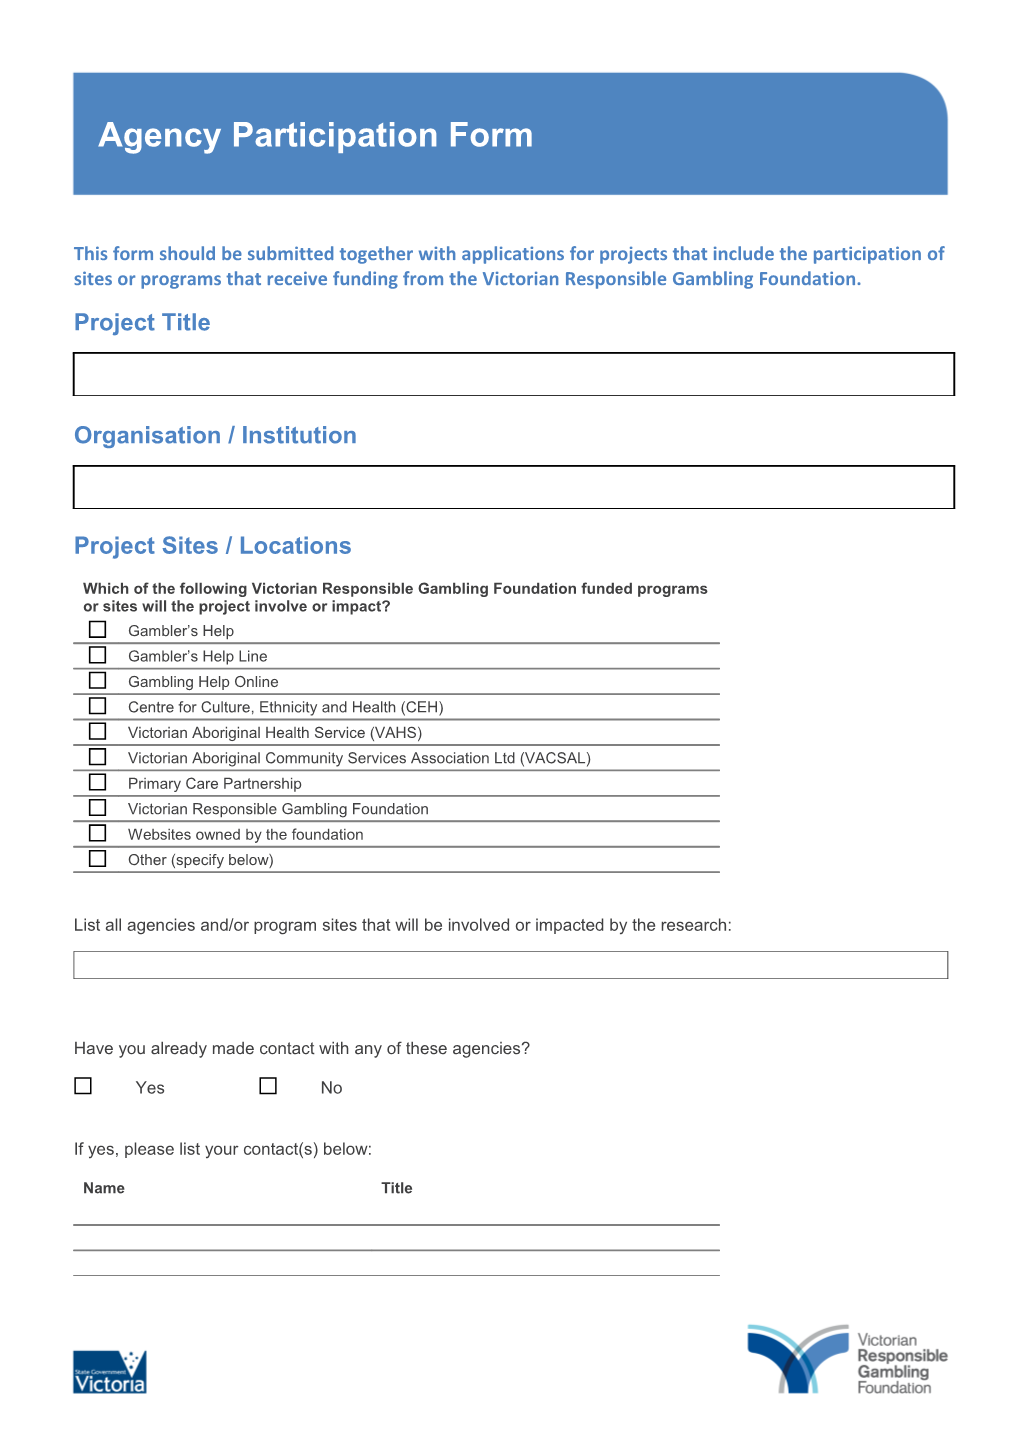 This Form Should Be Submitted Together with Applications for Projects That Include The